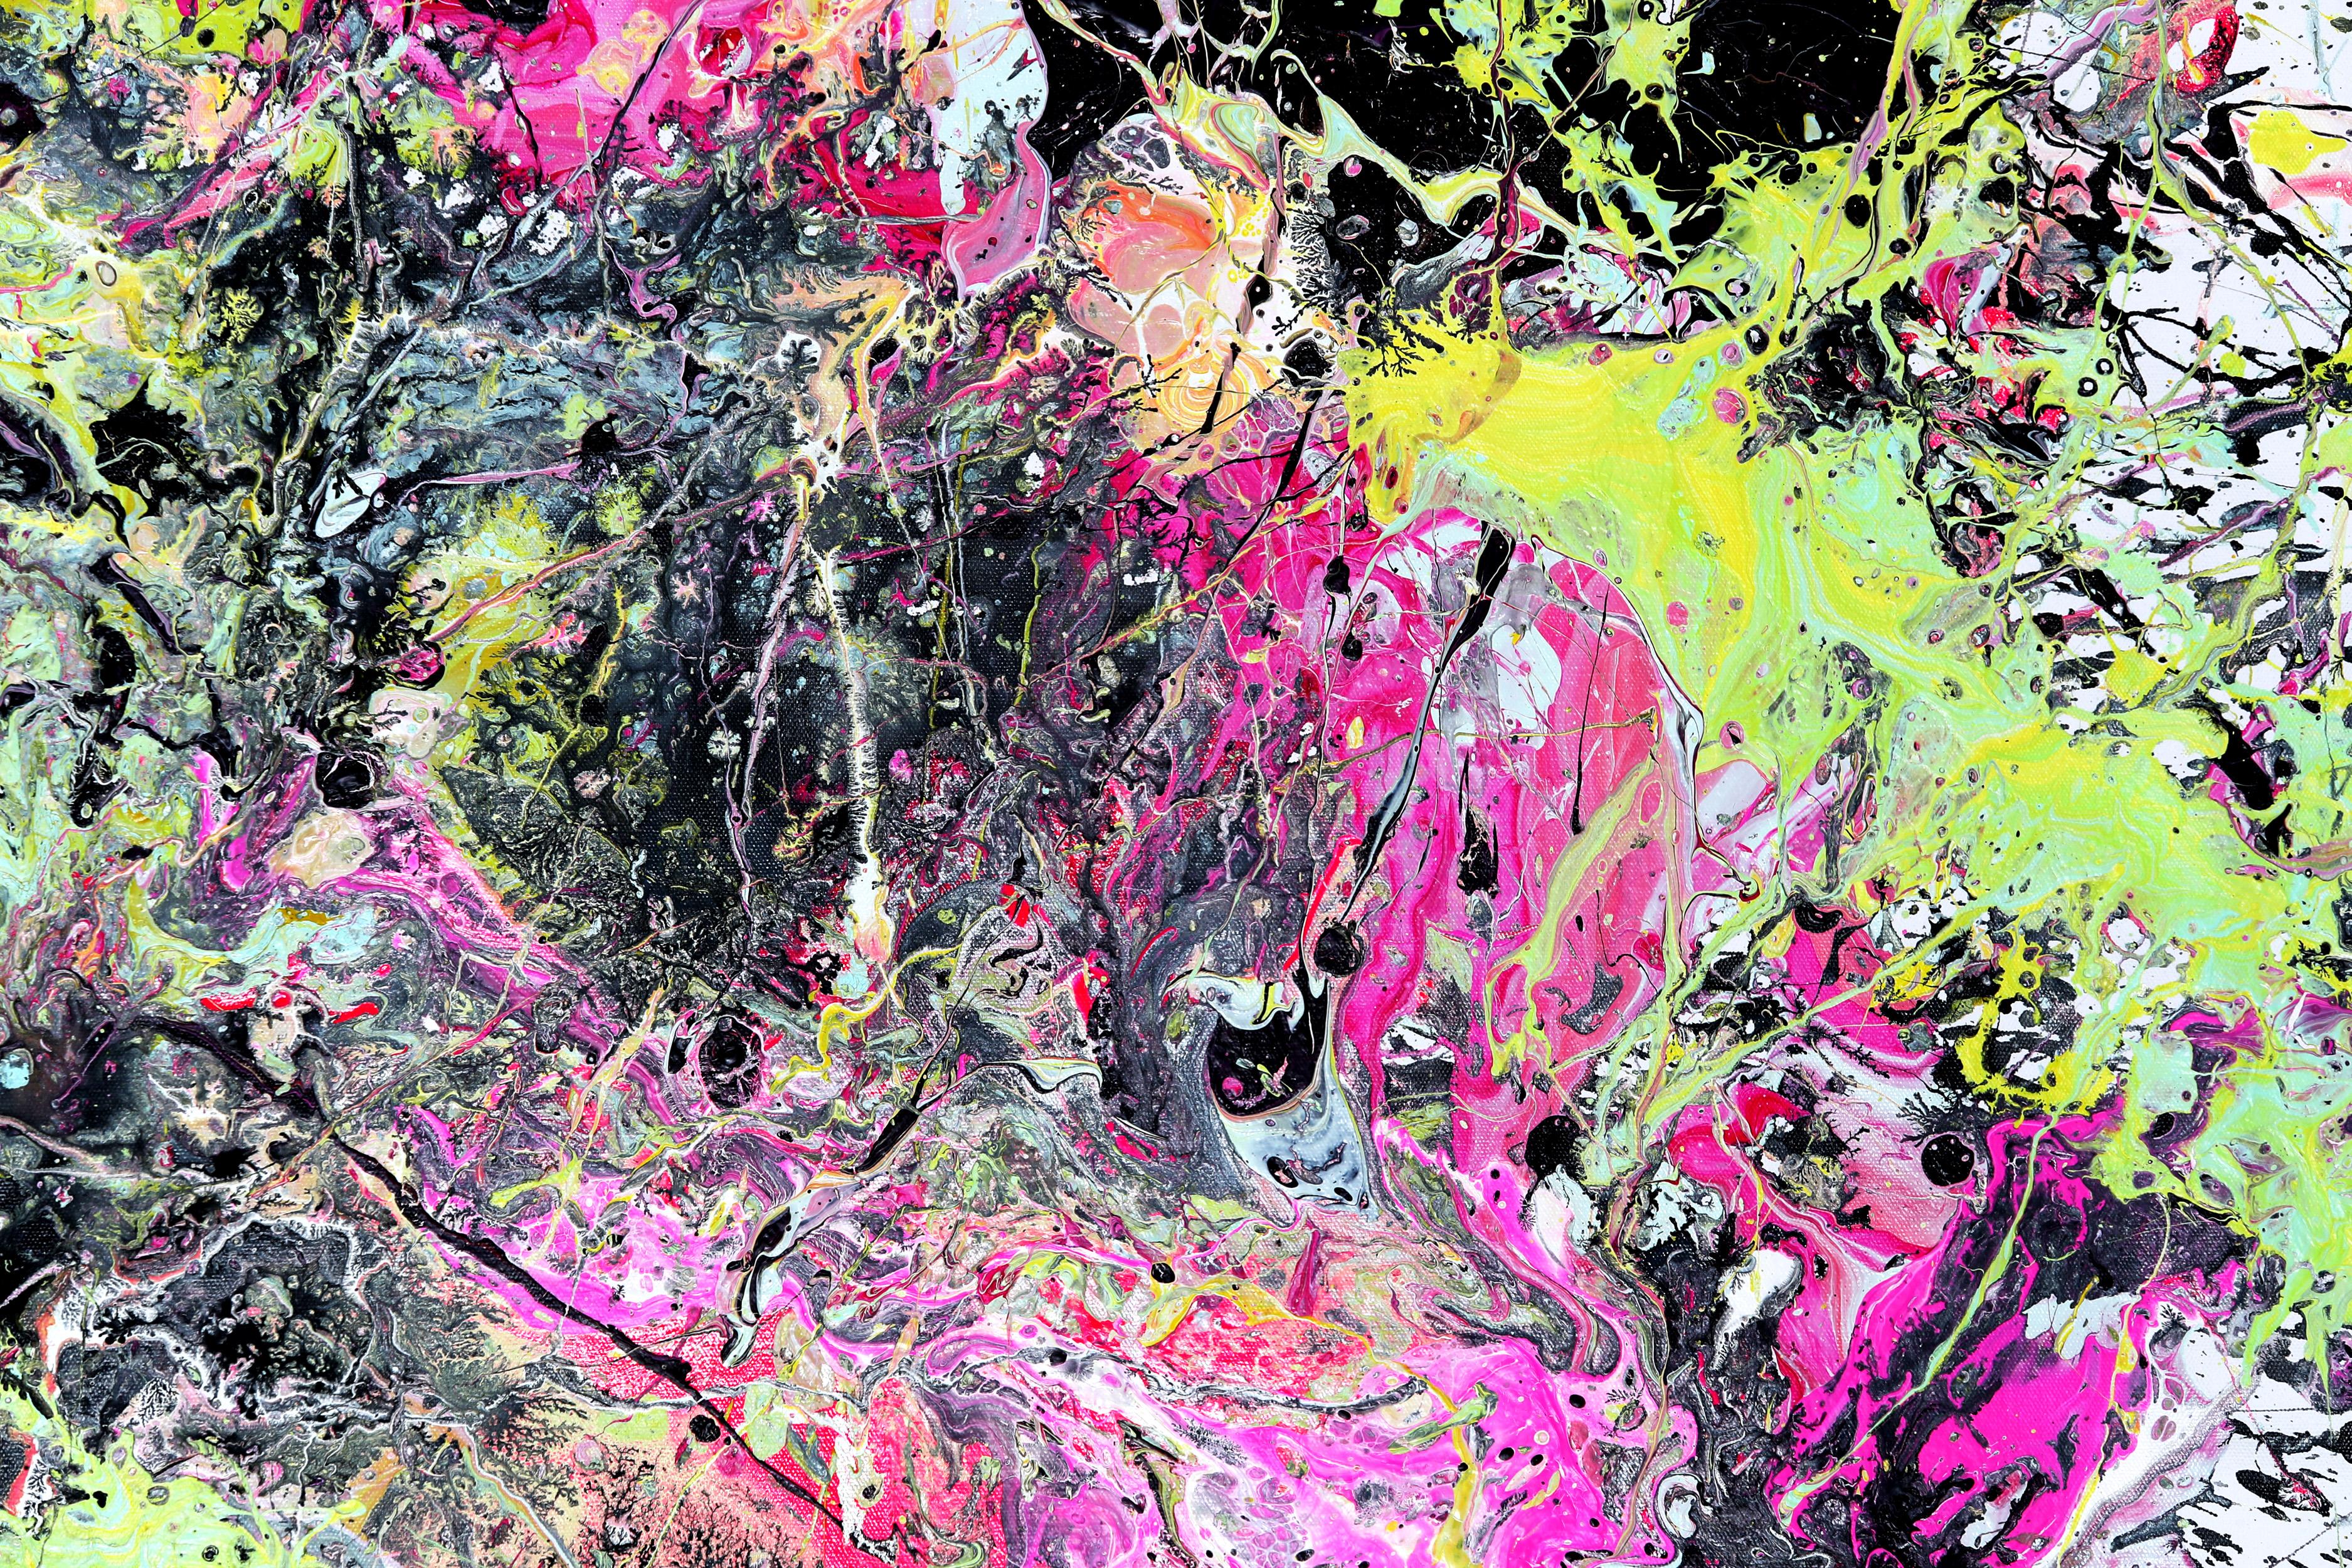 When Worlds Collide - Abstract Expressionist Painting by Estelle Asmodelle